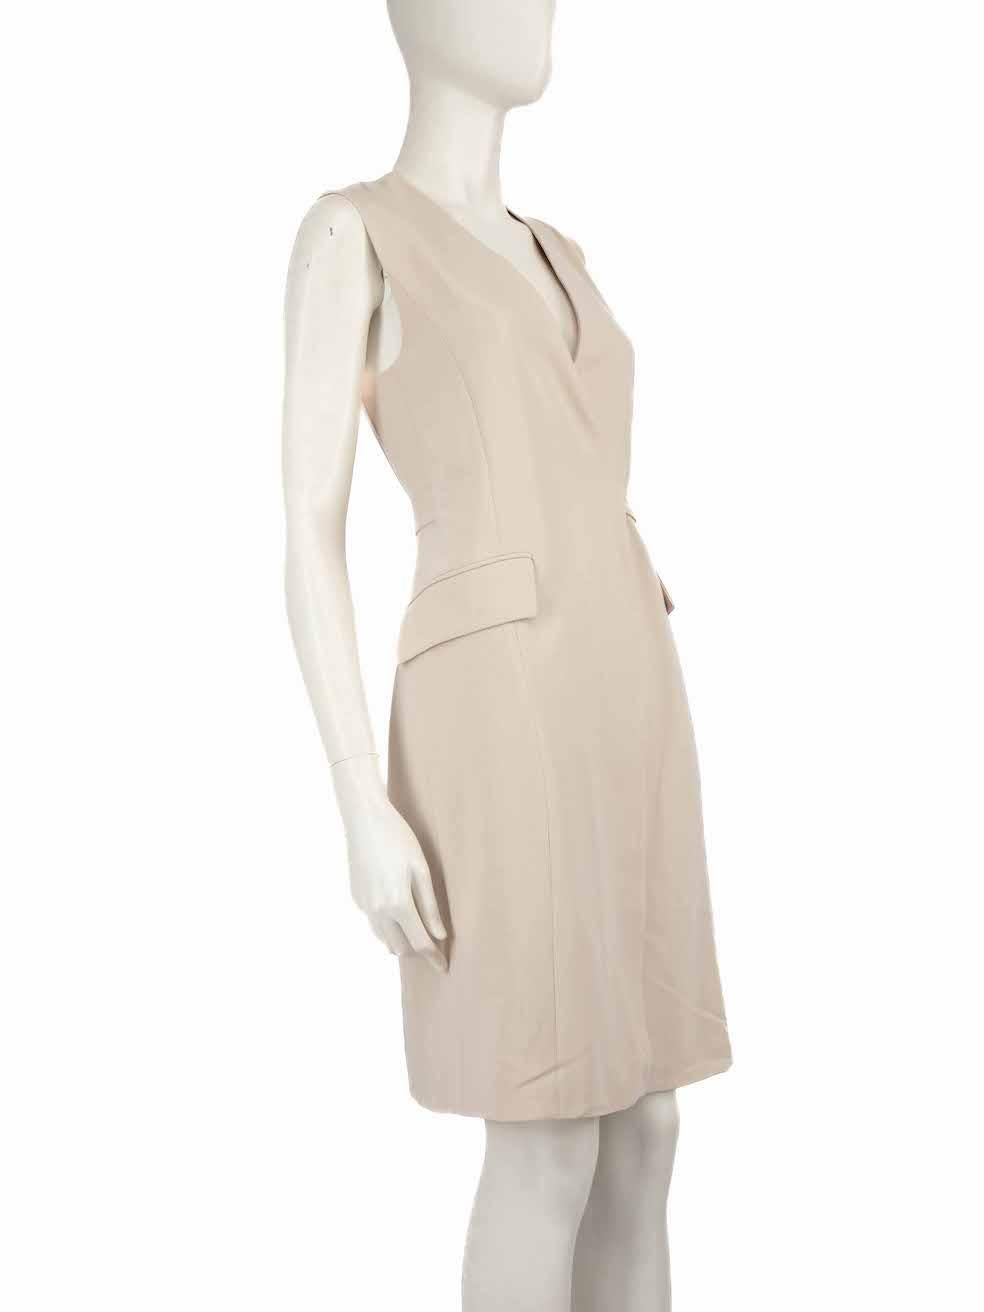 CONDITION is Very good. Hardly any visible wear to the dress is evident on this used Theory designer resale item.
 
 
 
 Details
 
 
 Beige
 
 Triacetate
 
 Sleeveless vest
 
 Long length
 
 V neck
 
 Sleeveless
 
 2 x pockets
 
 Front attached